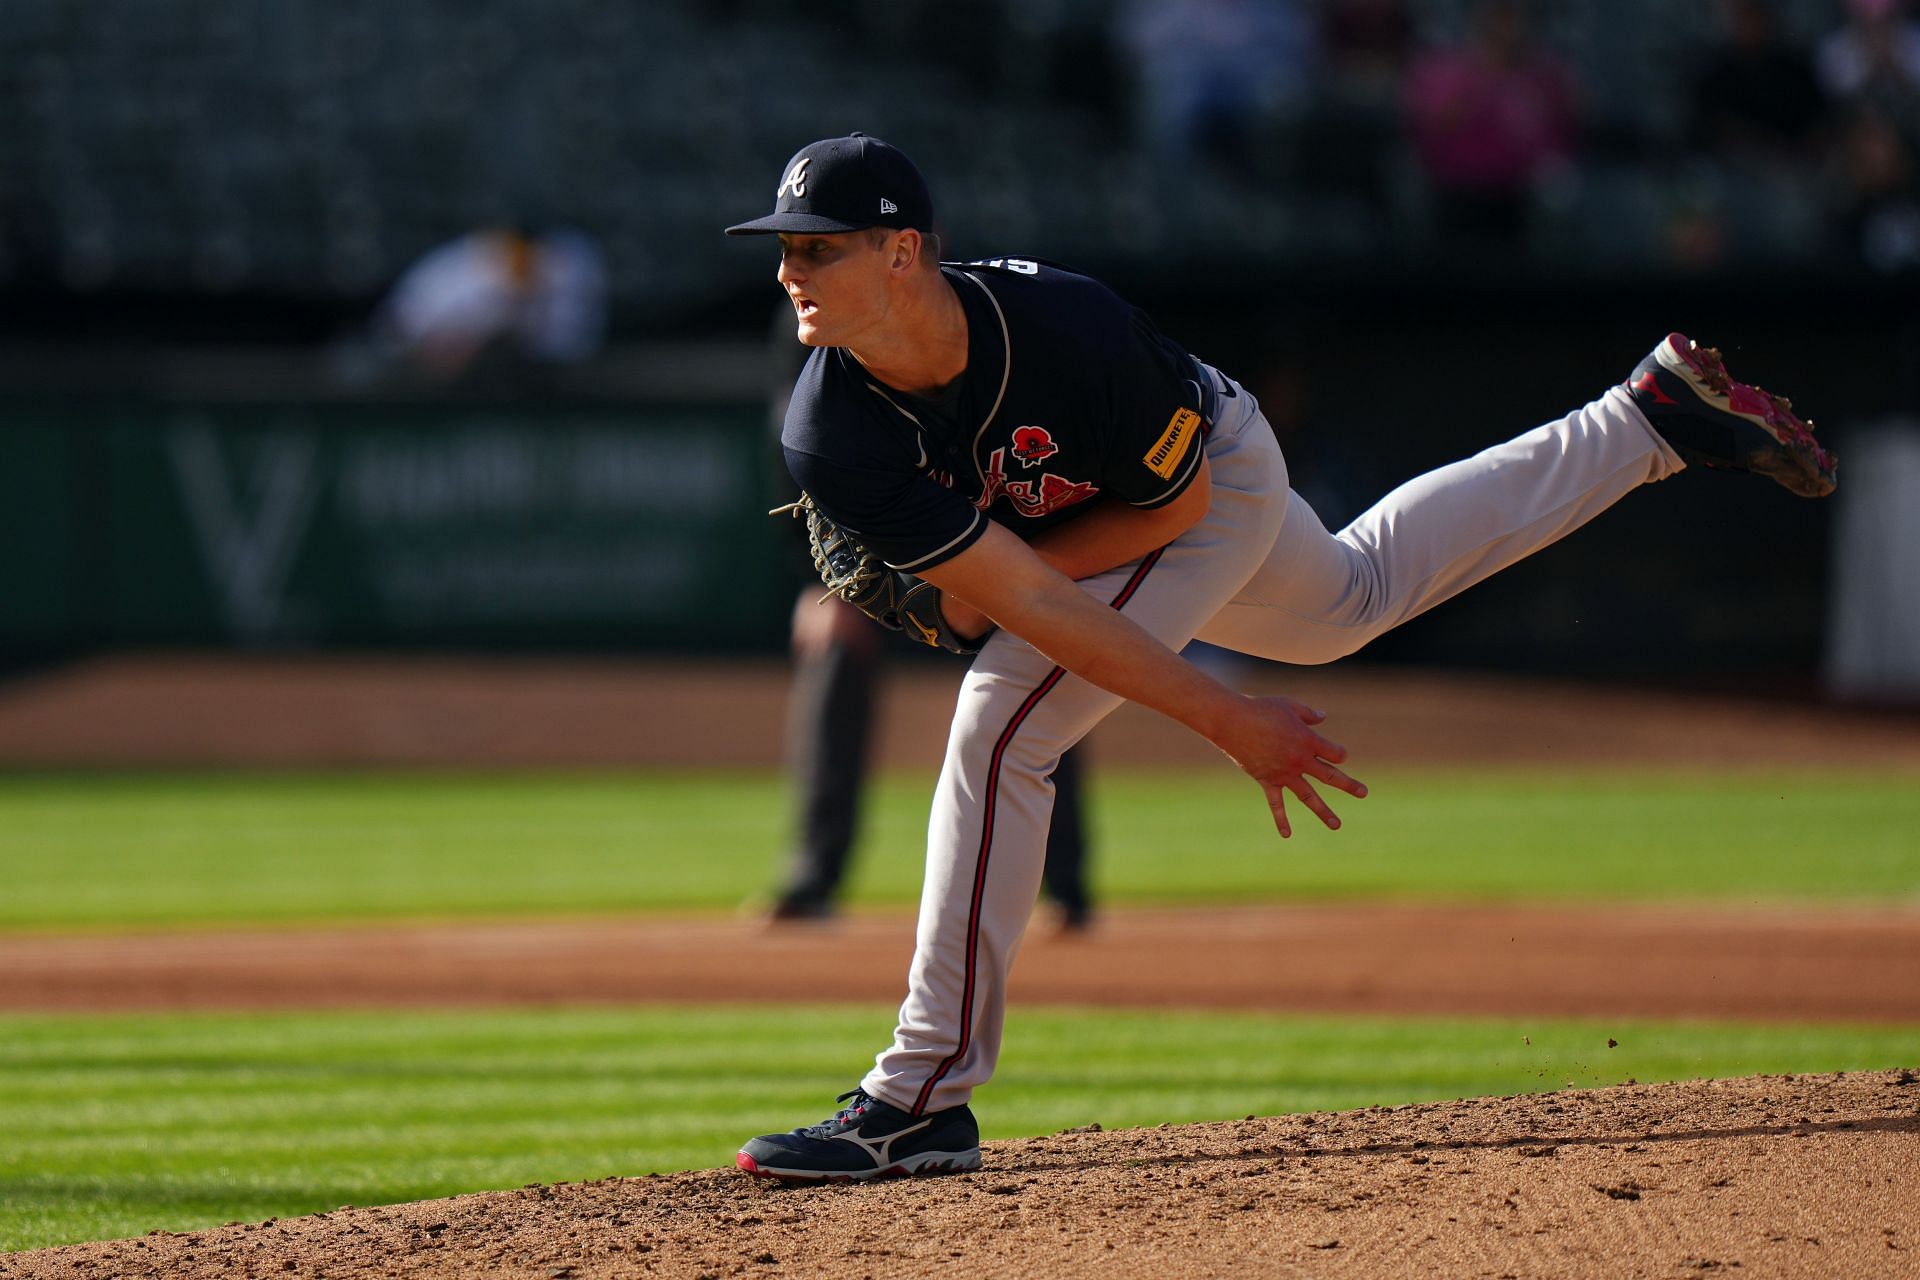 Michael Soroka #40 of the Atlanta Braves pitches in the third inning against the Oakland Athletics at RingCentral Coliseum on May 29, 2023